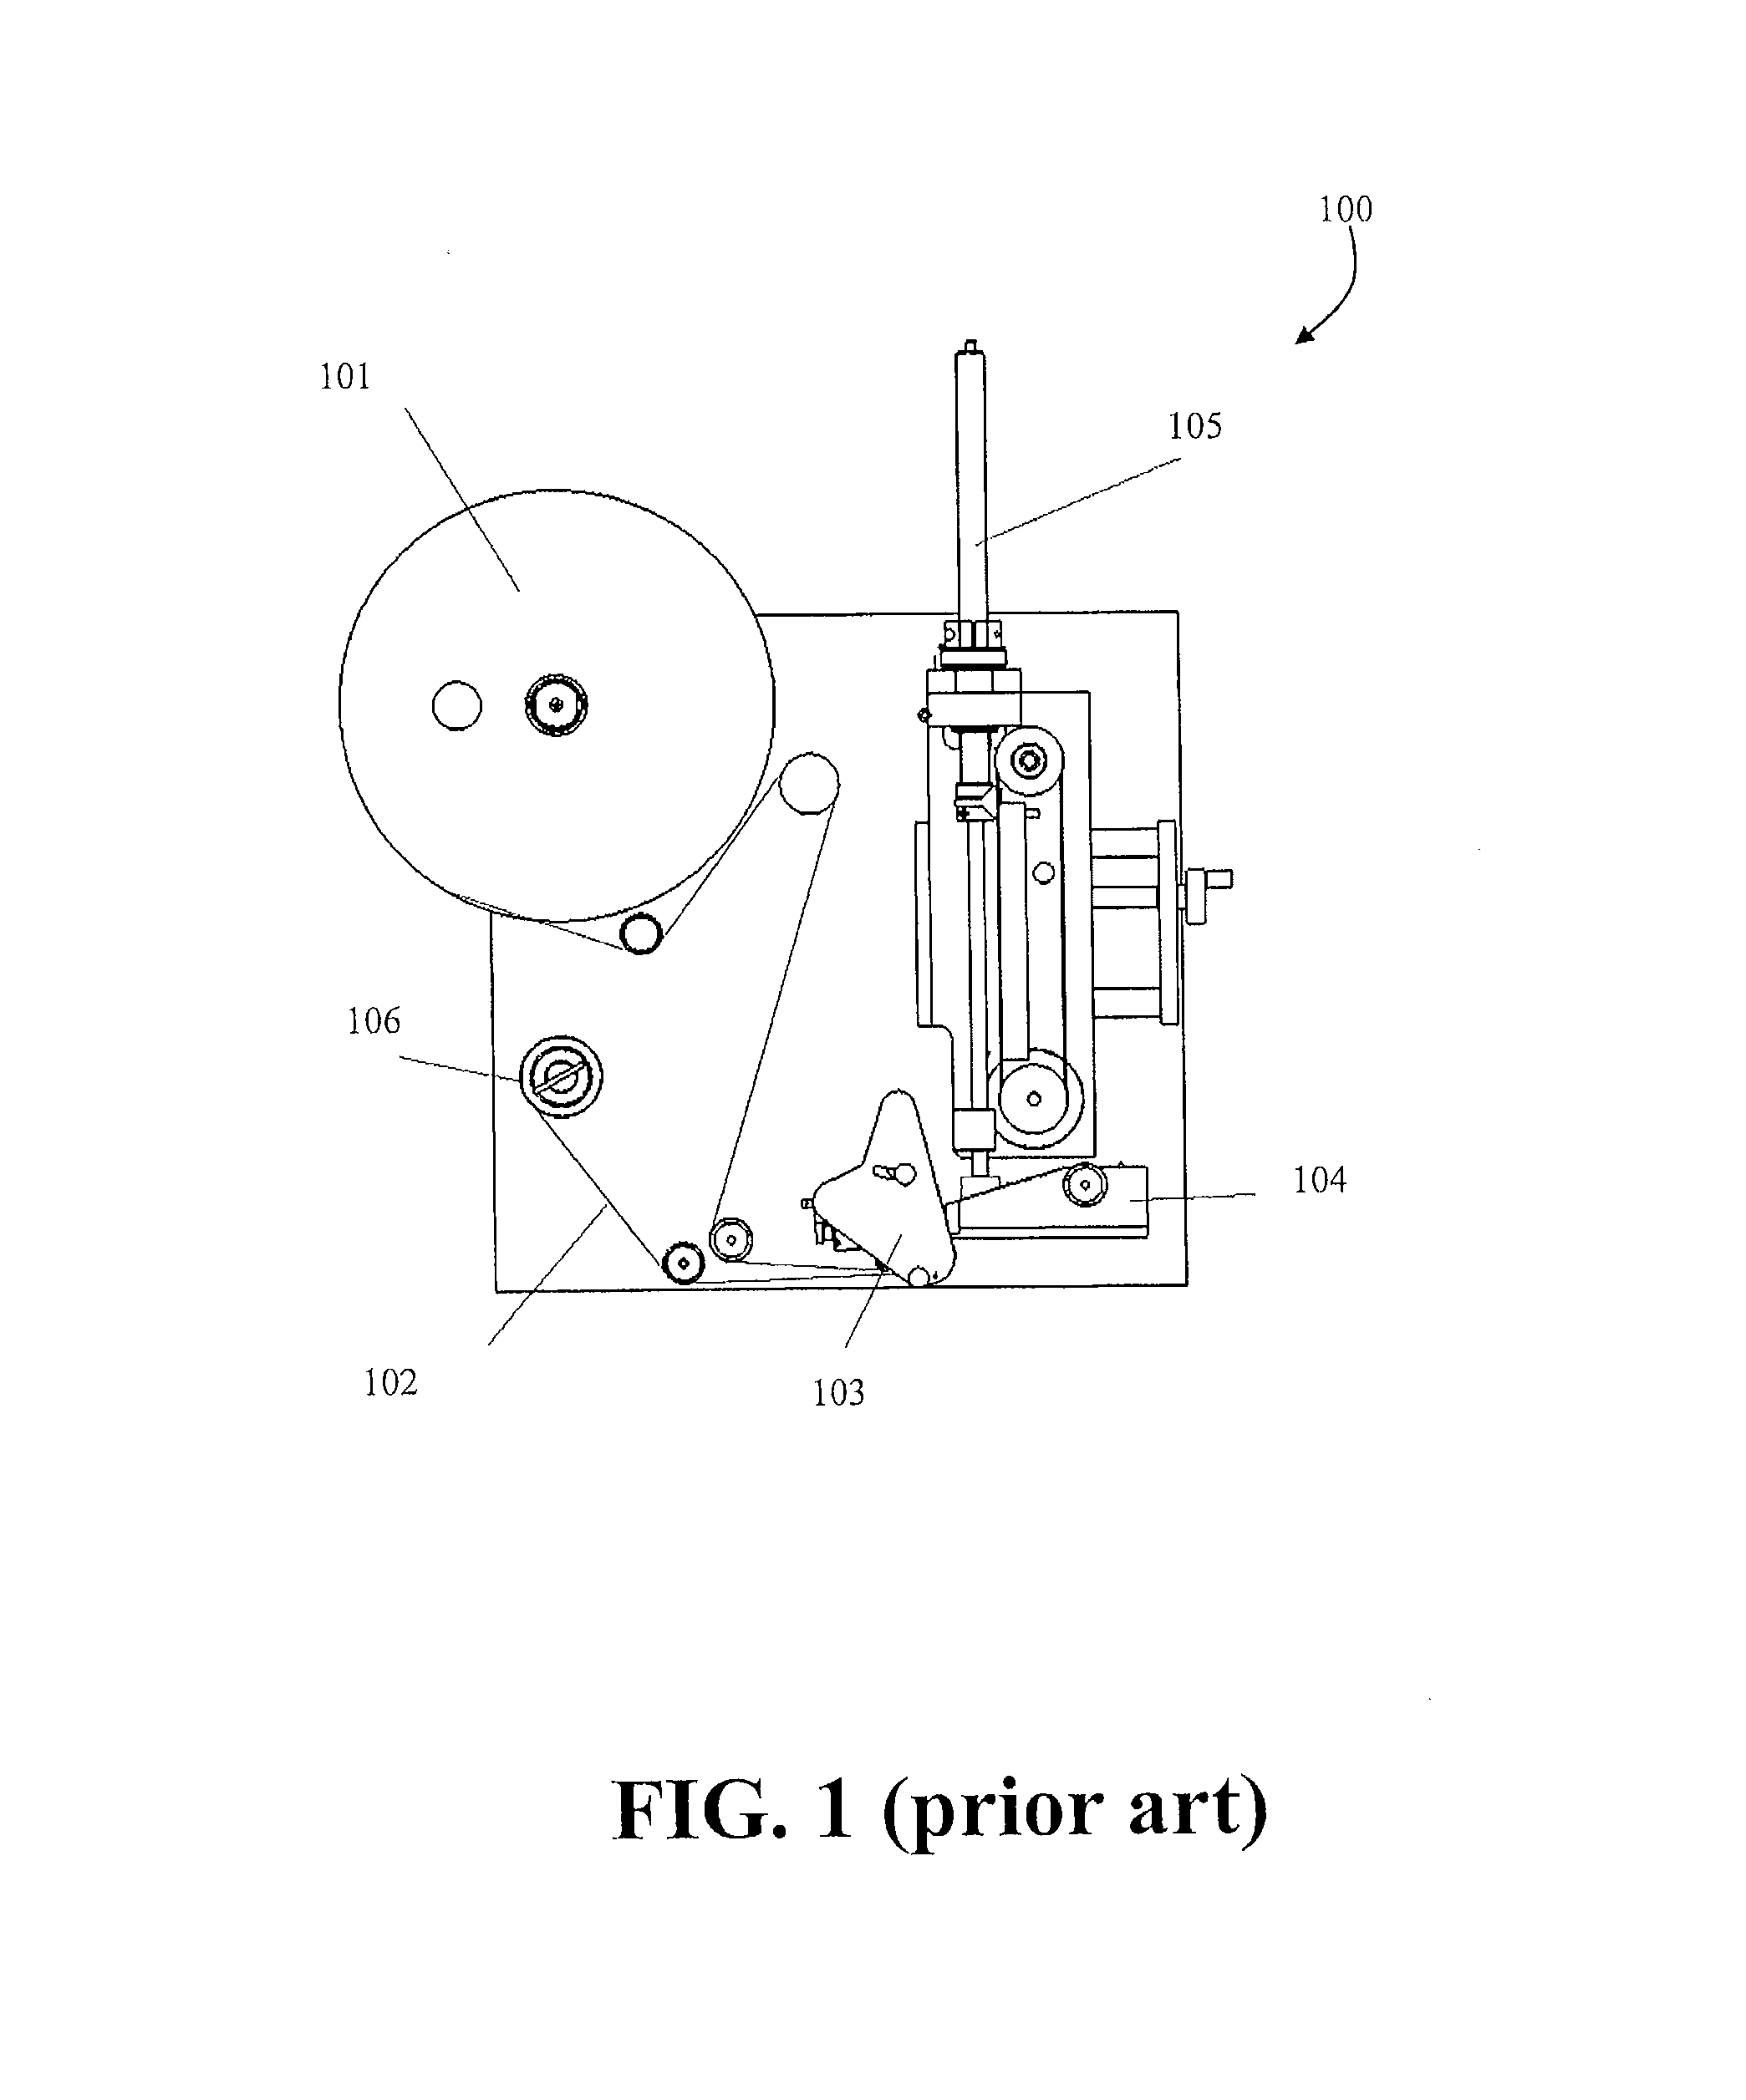 Labeling device for labeling objects, in particular moving objects